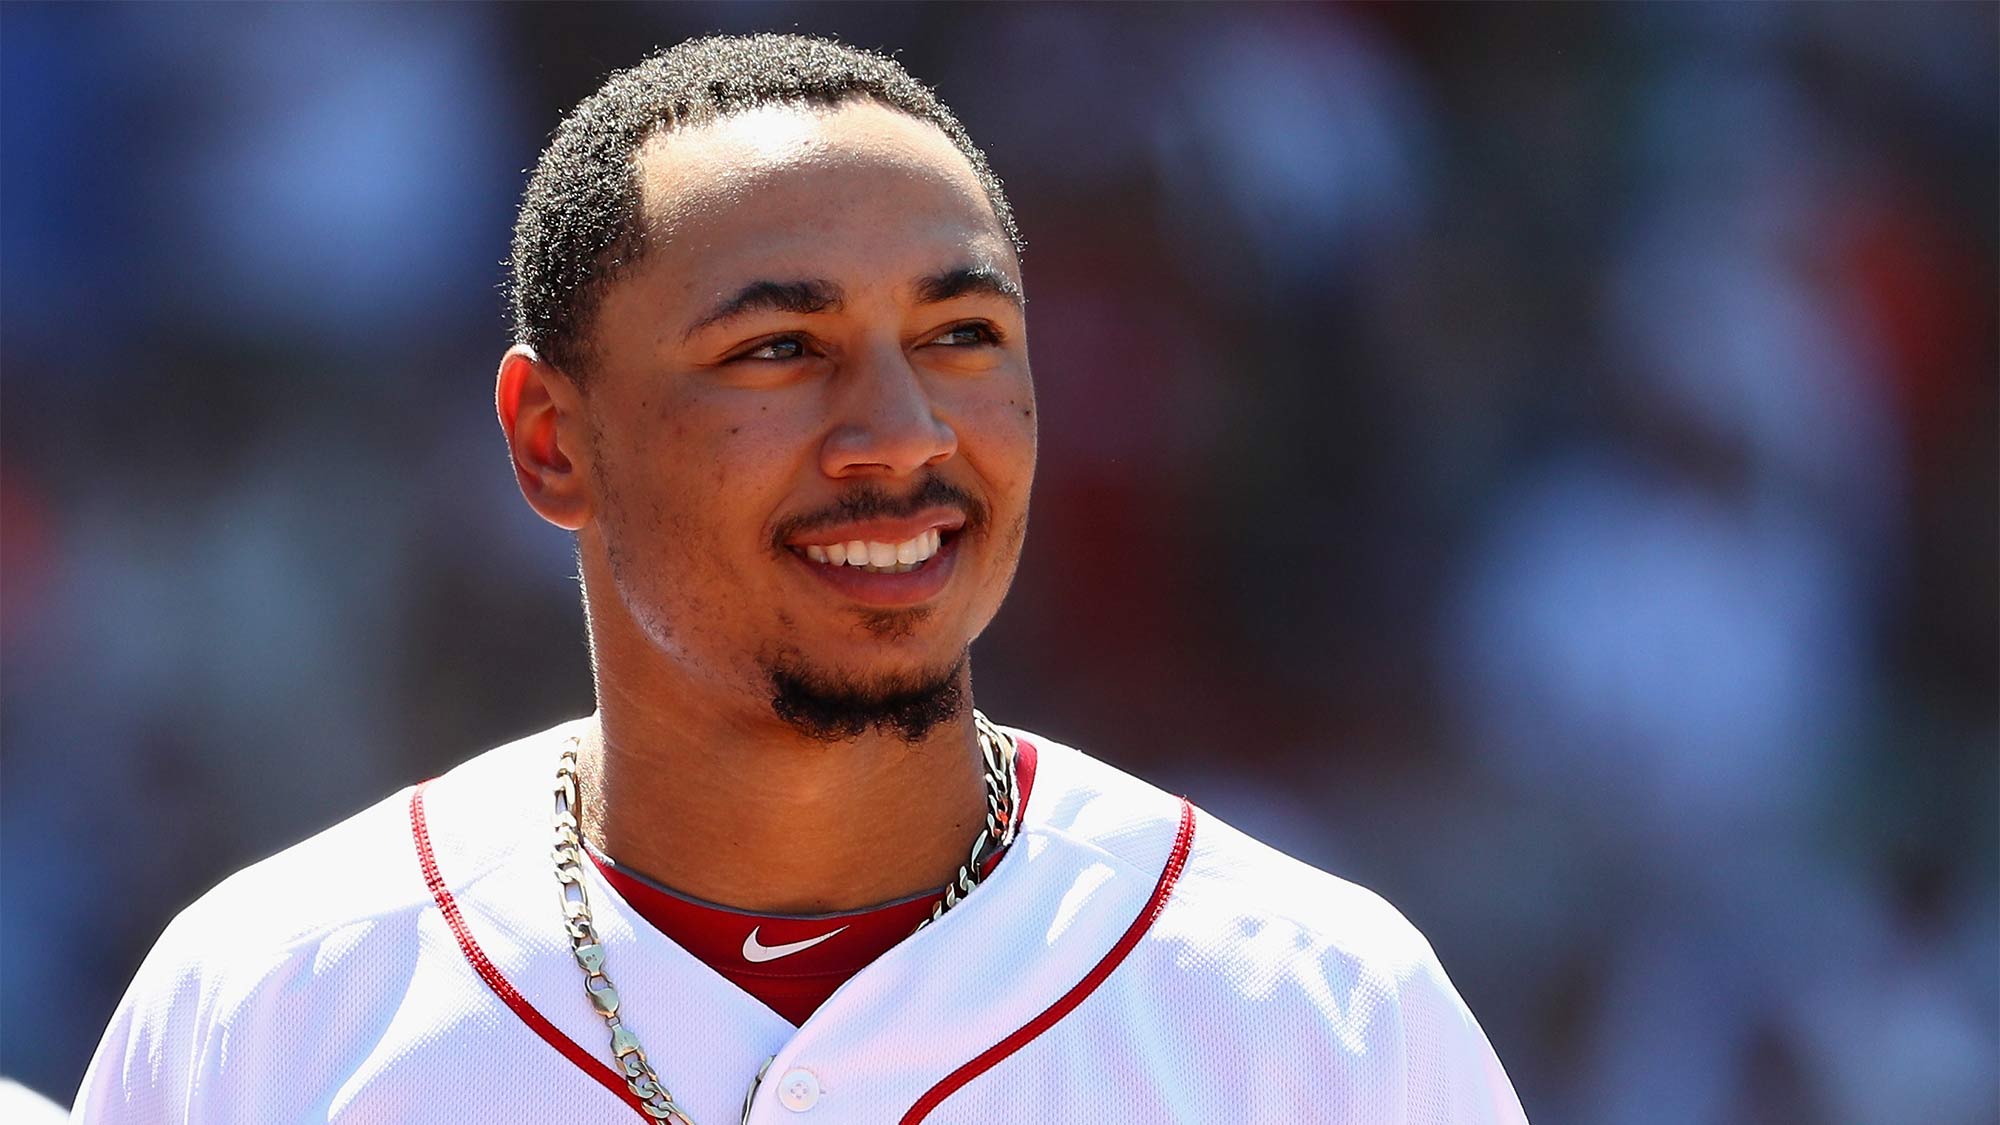 Mookie Betts Ethnicity, Race, and Nationality